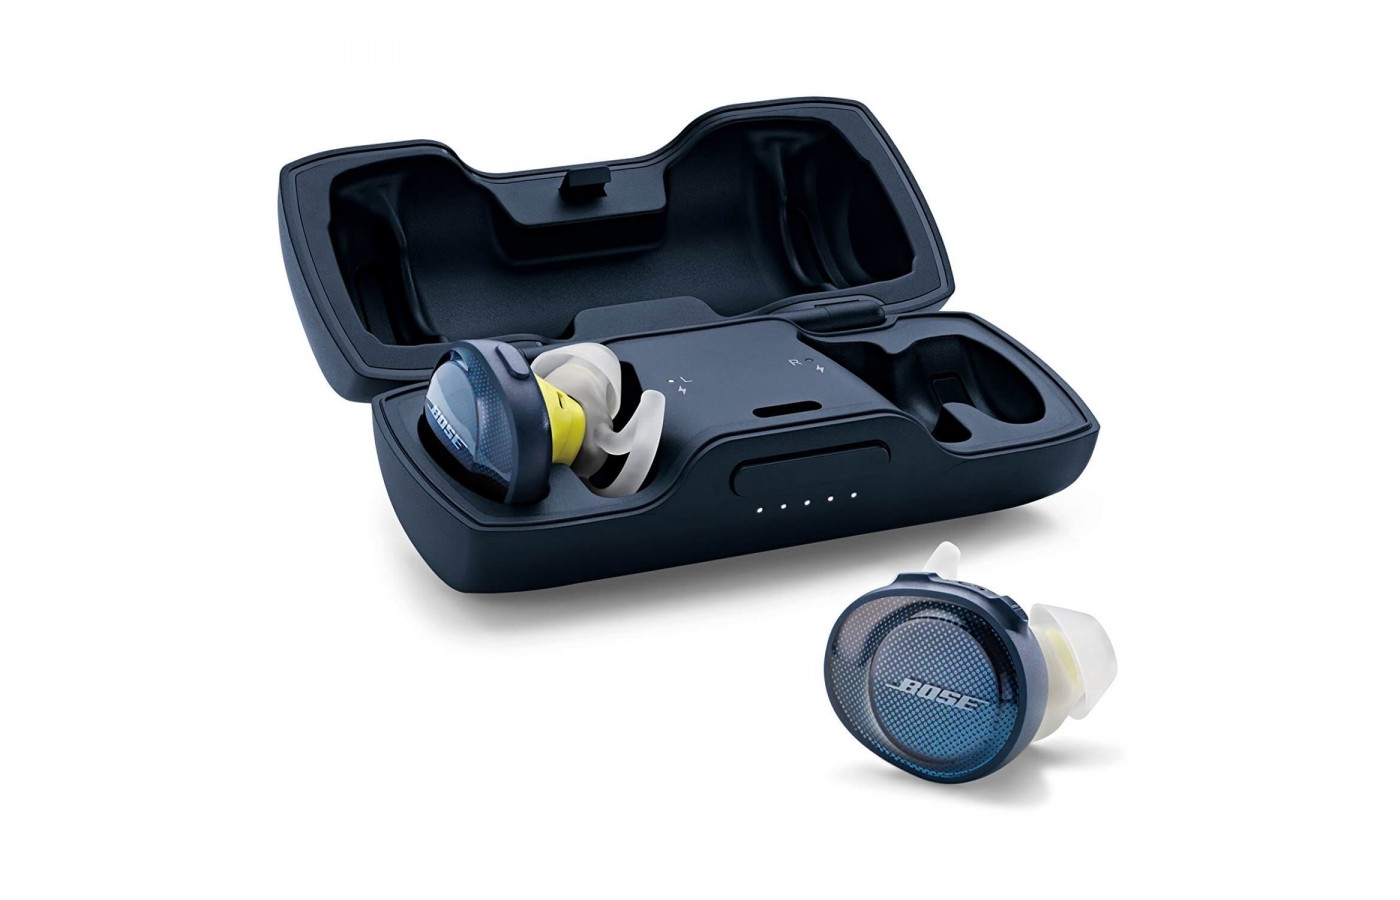 The The Bose SoundSport Free headphones come with a travel charging case